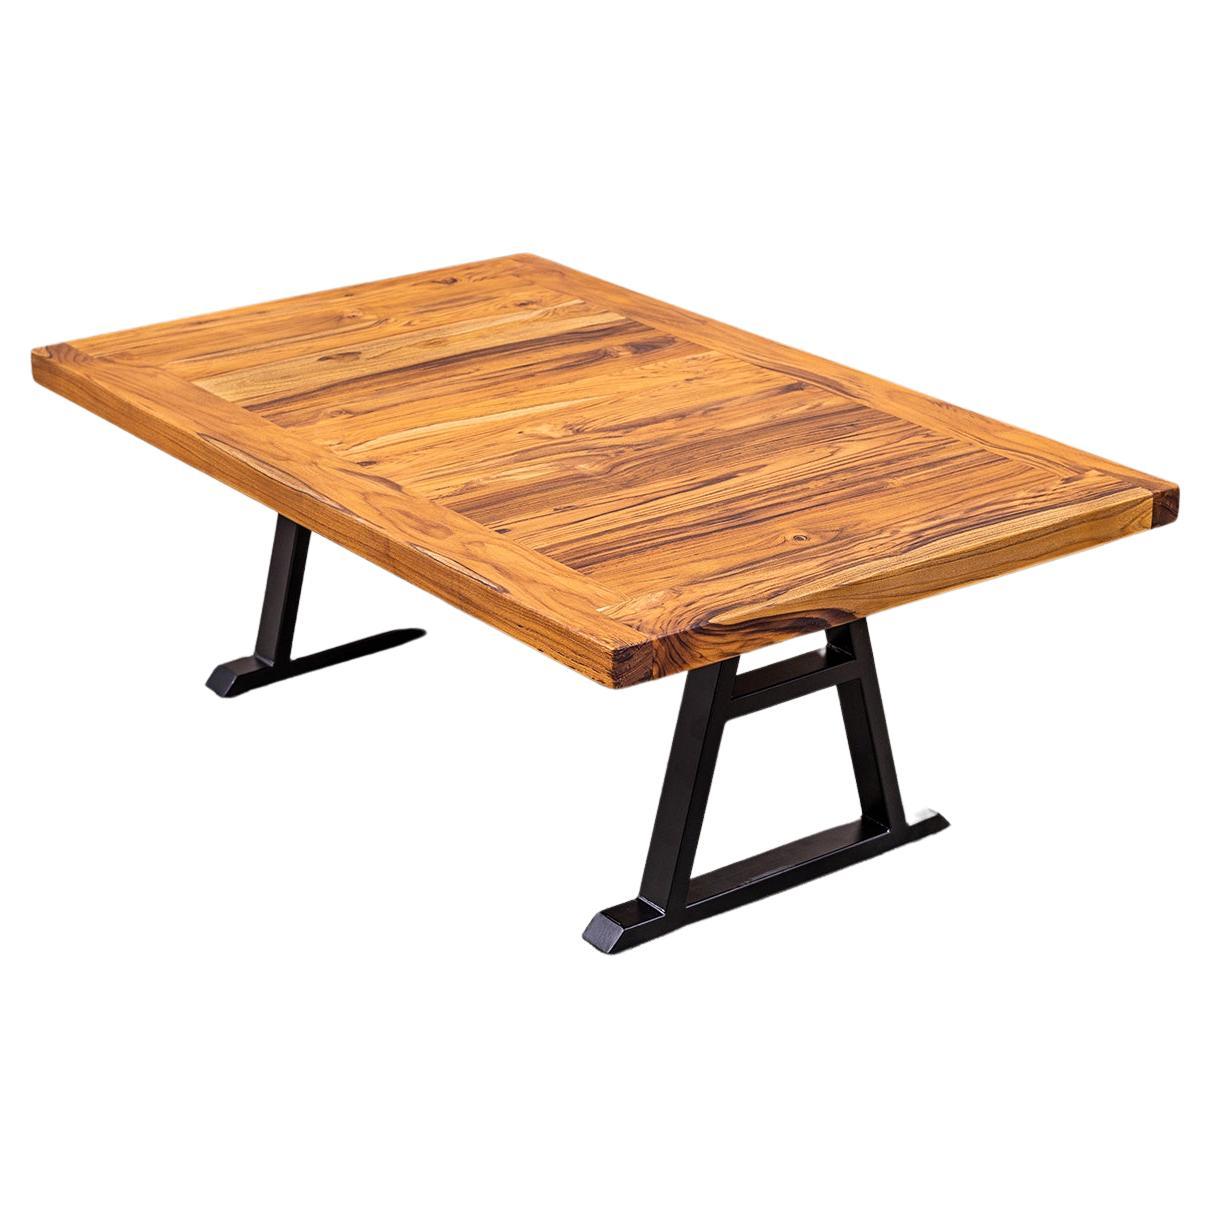 Solid Teak Coffee Table in a Natural Distressed Finish